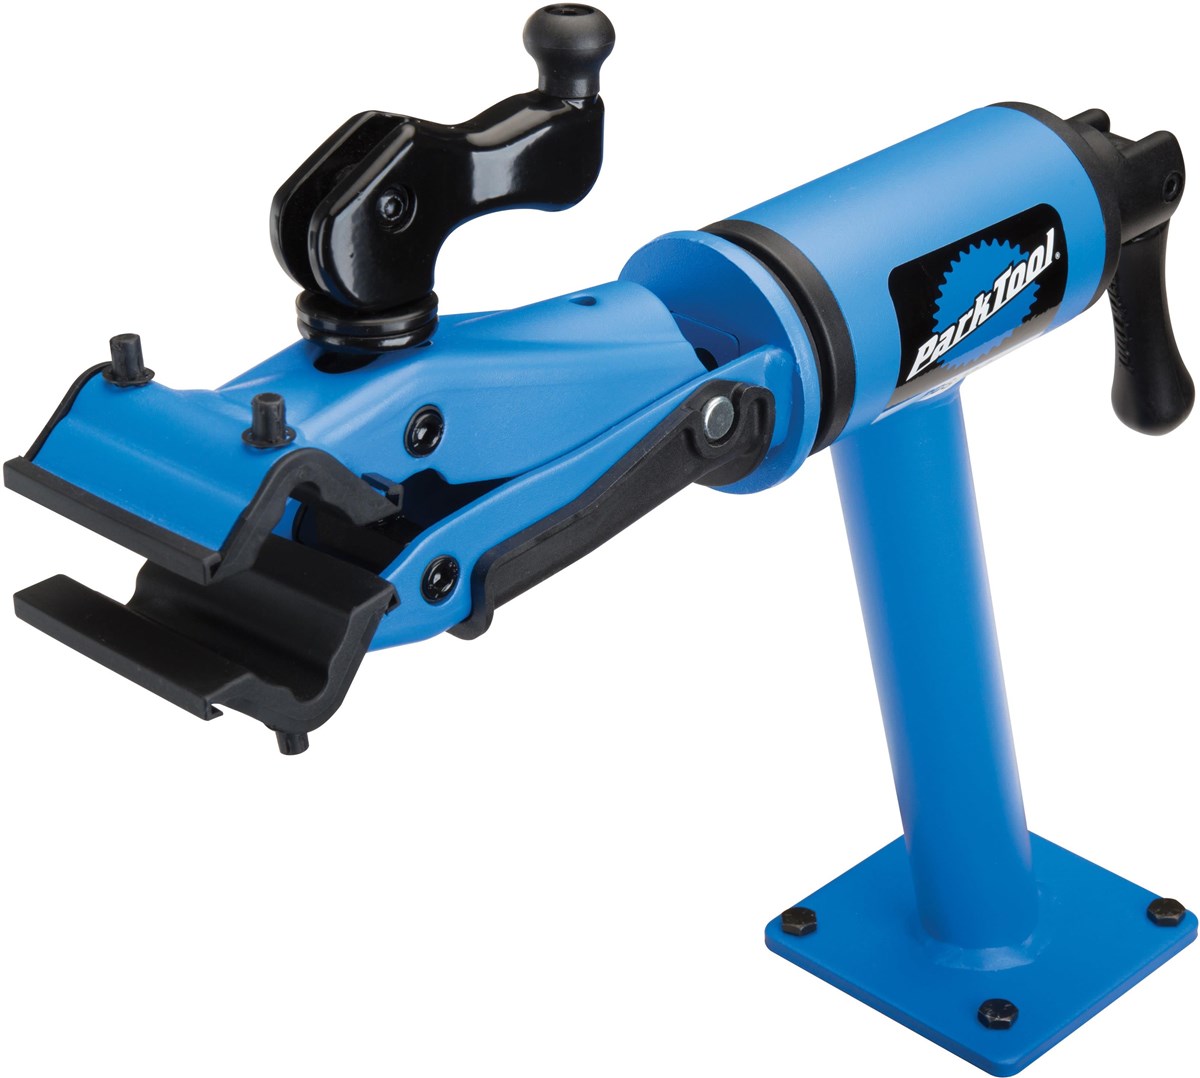 Park Tool PCS-12.2 - Home Mechanic Bench-Mount Repair Stand product image